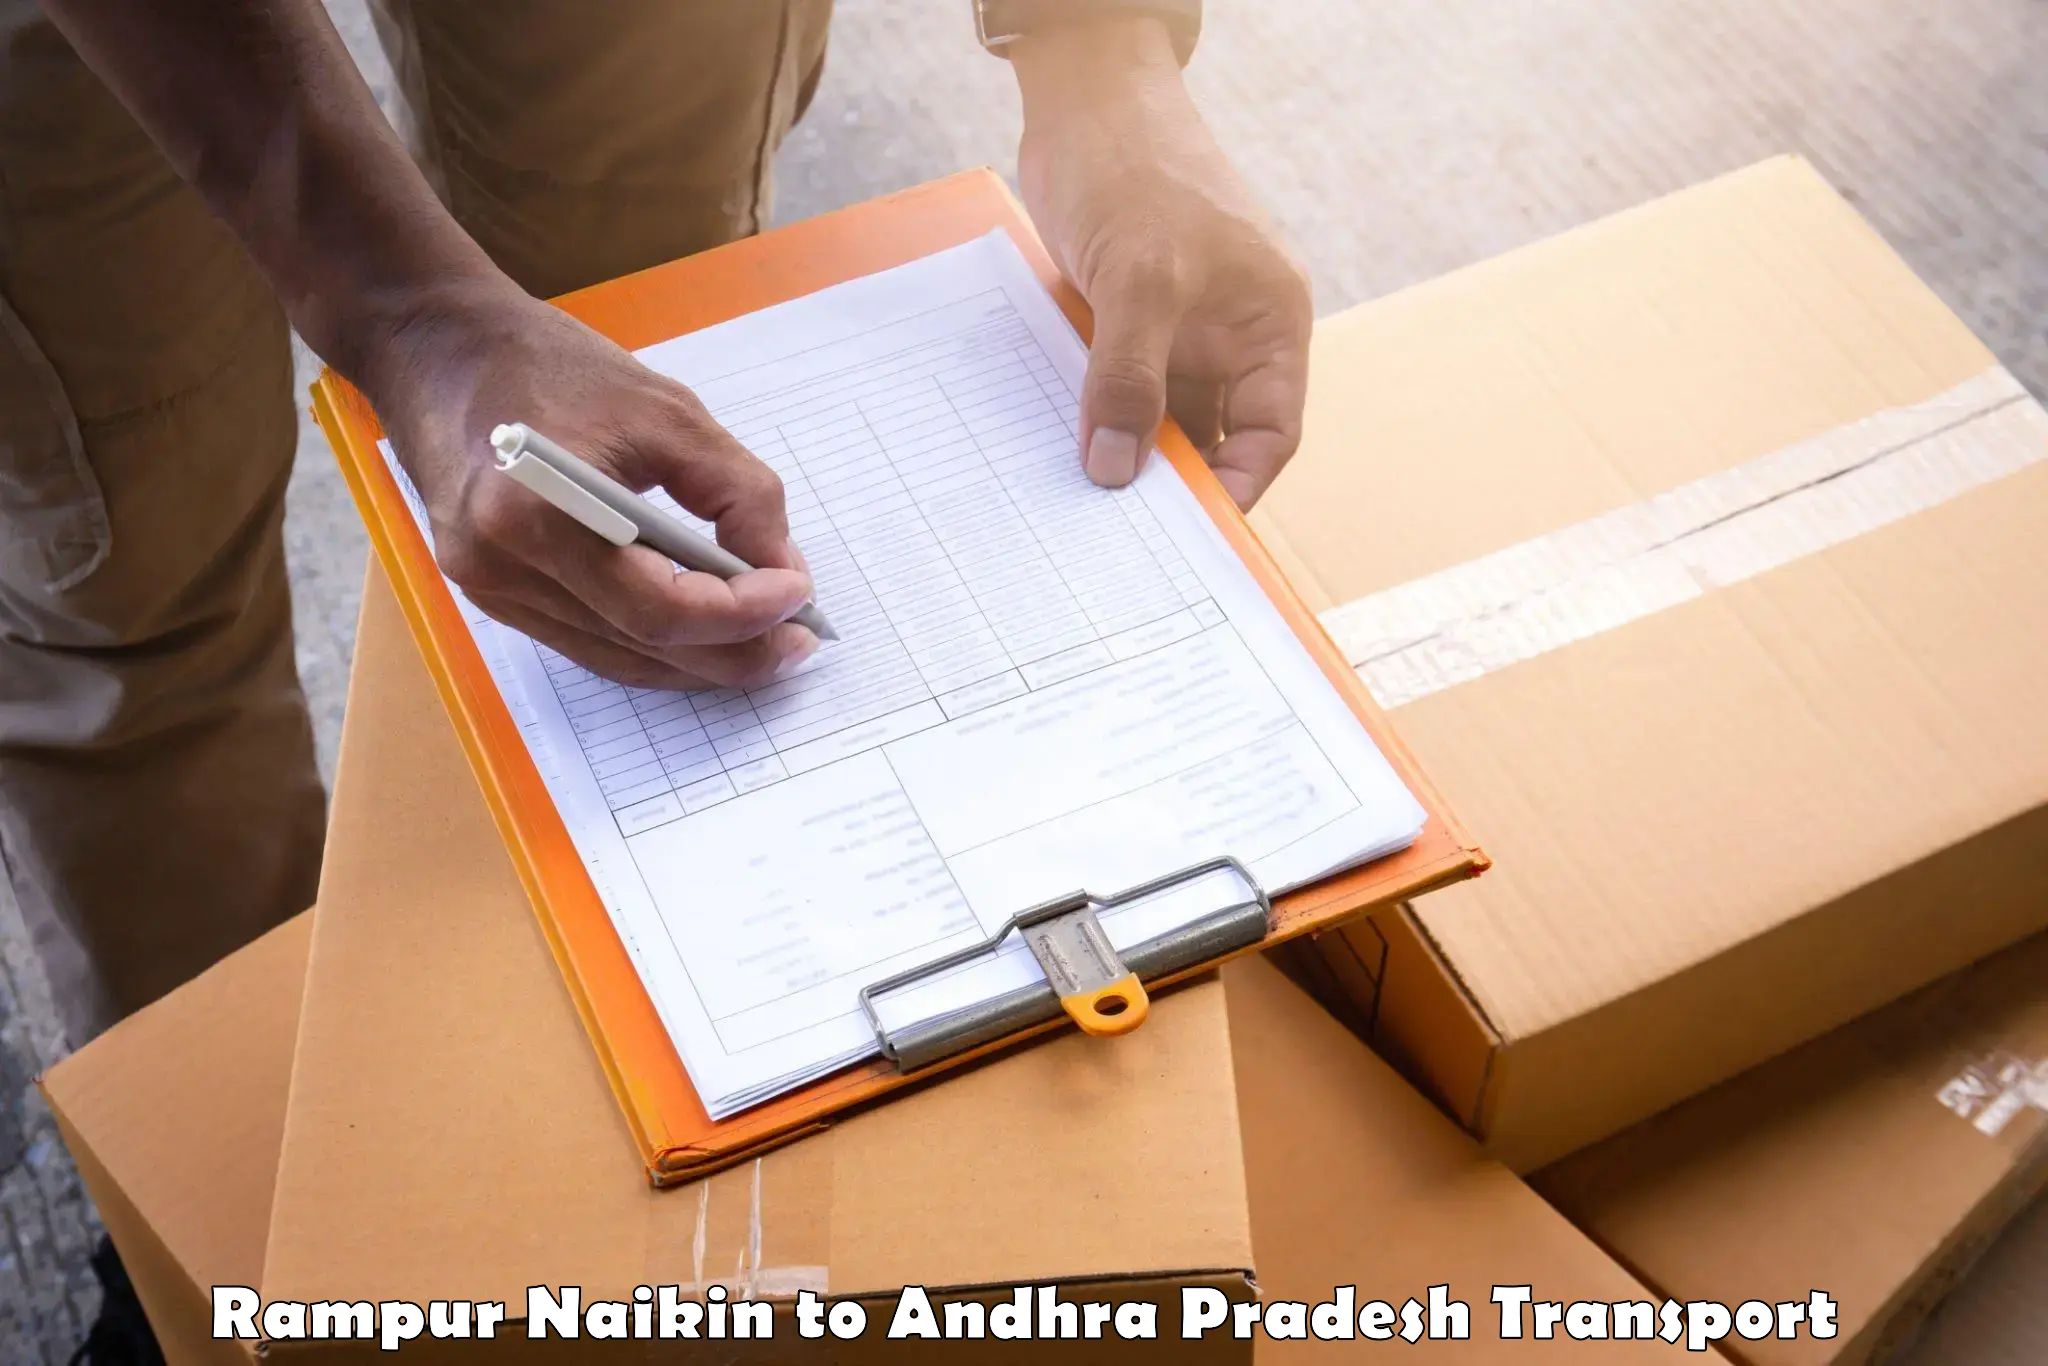 Parcel transport services Rampur Naikin to Anantapur